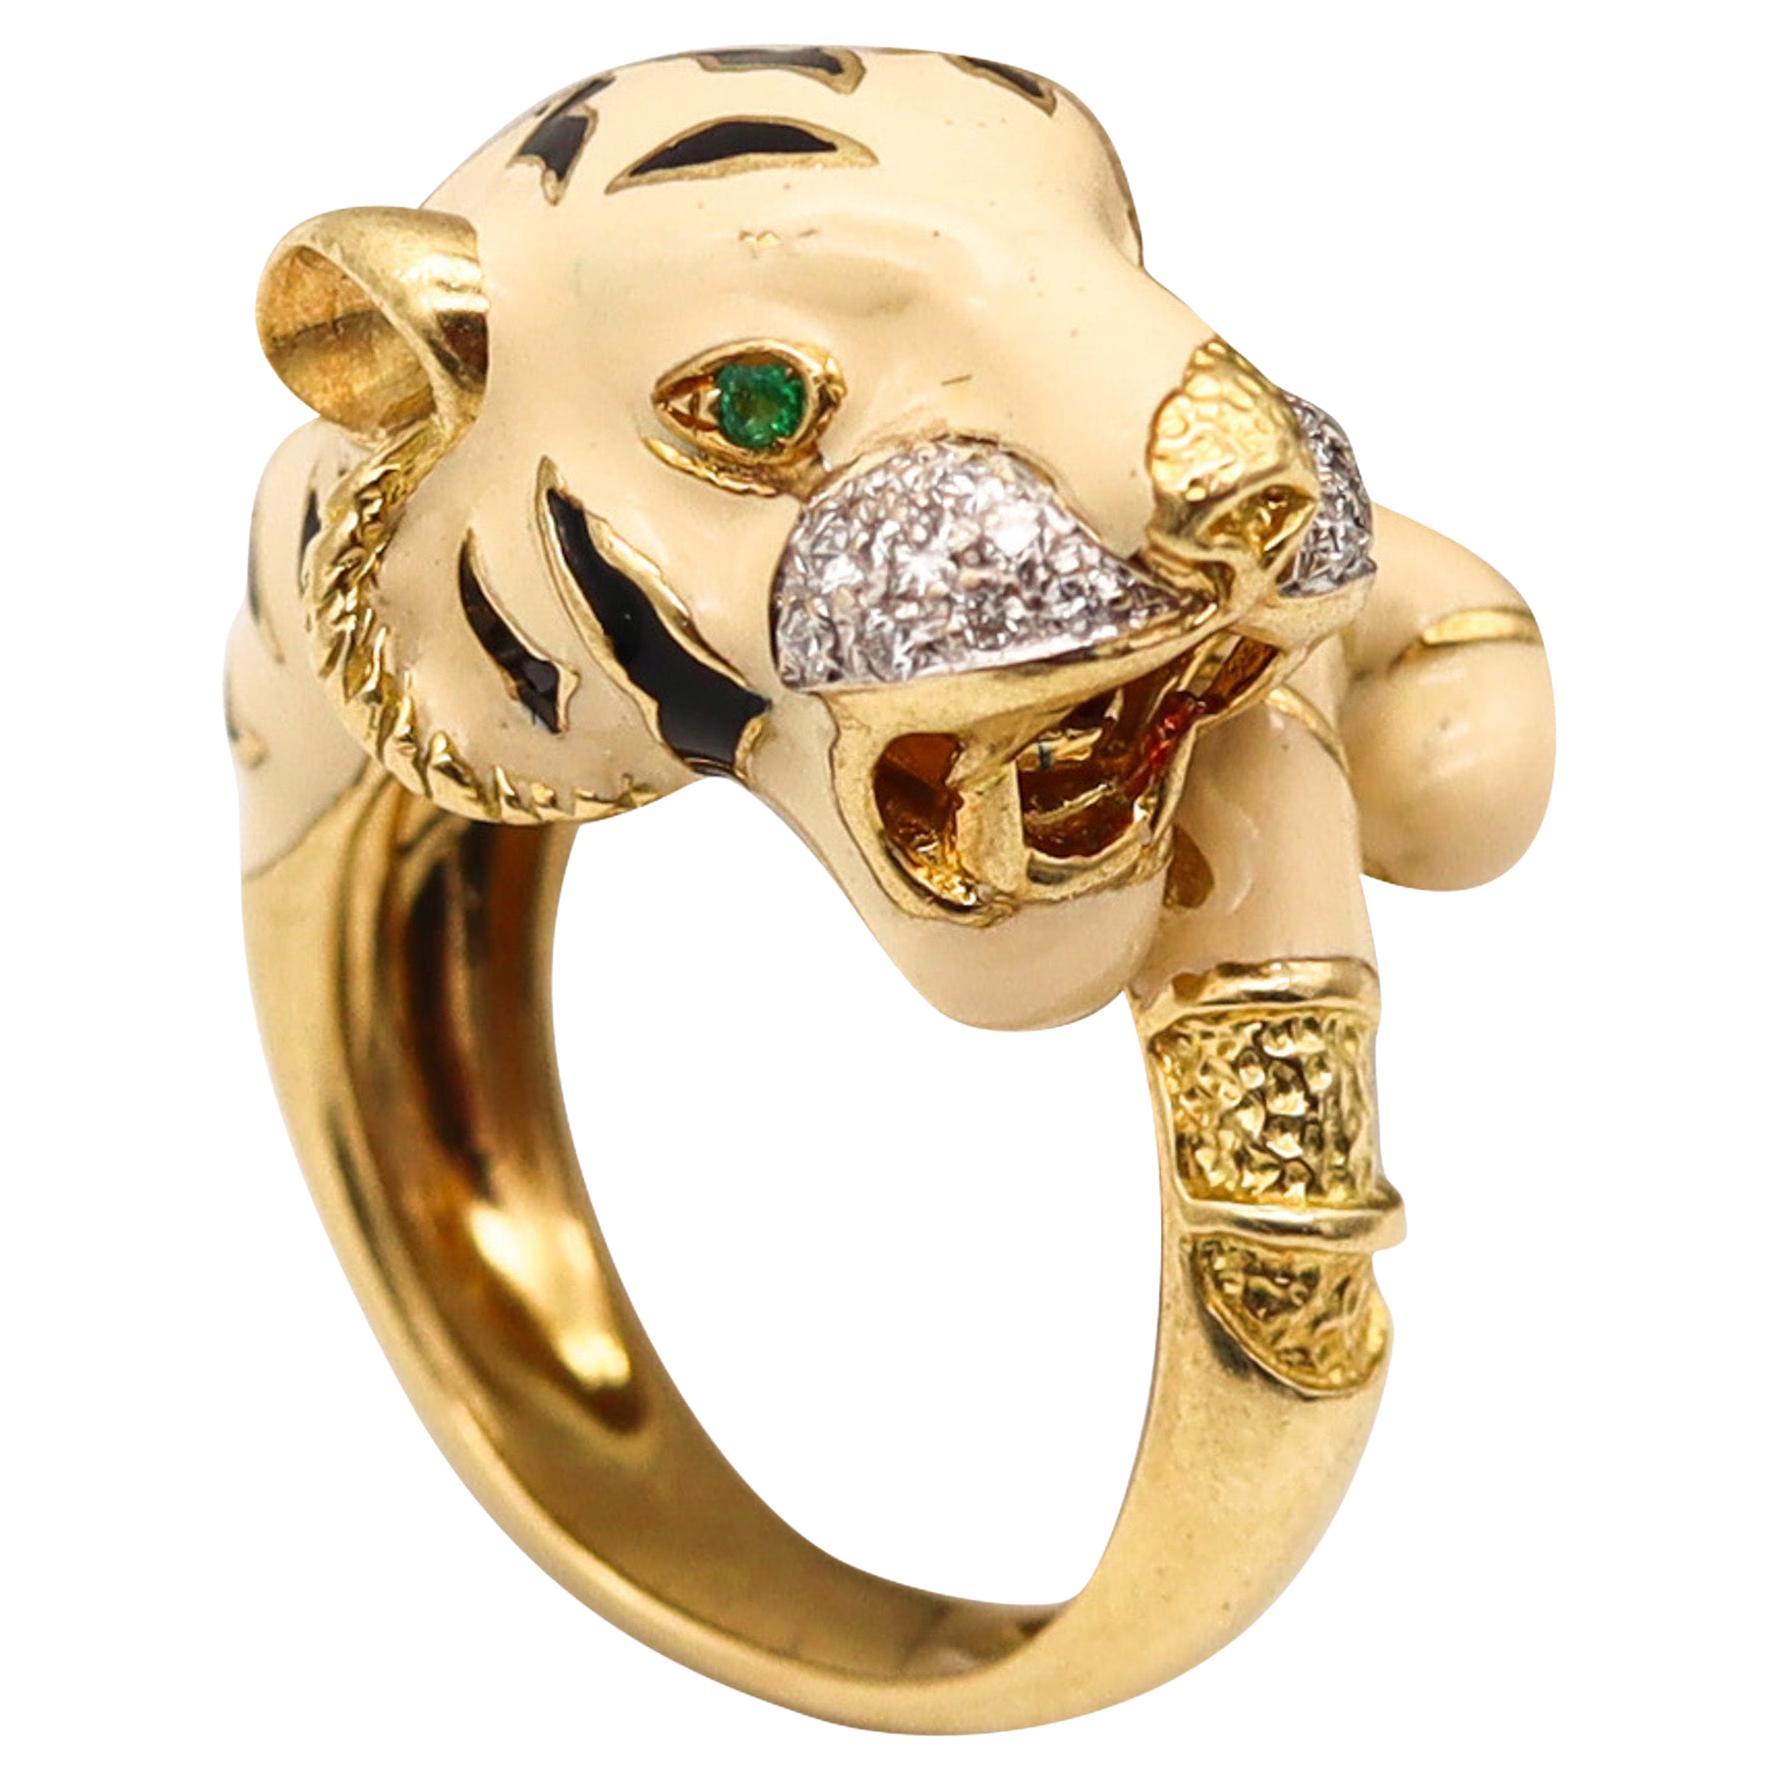 Roberto Legnazzi Enameled Tiger Ring In 18Kt Gold With Diamonds And Emeralds For Sale